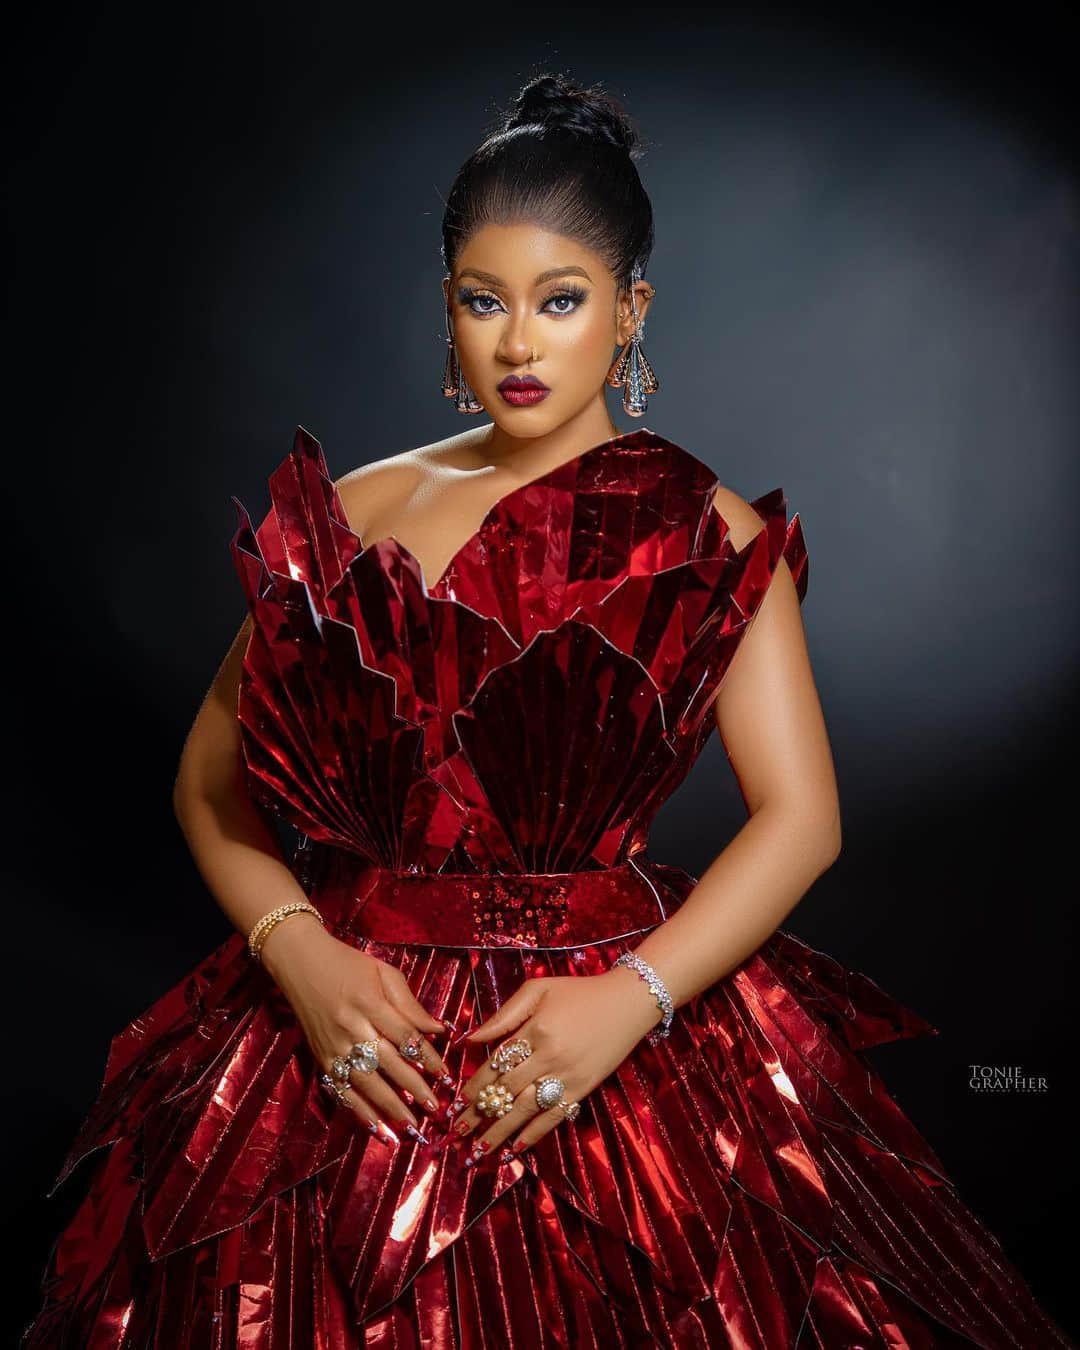 Phyna marks 26th birthday in style, pens glowing note to self